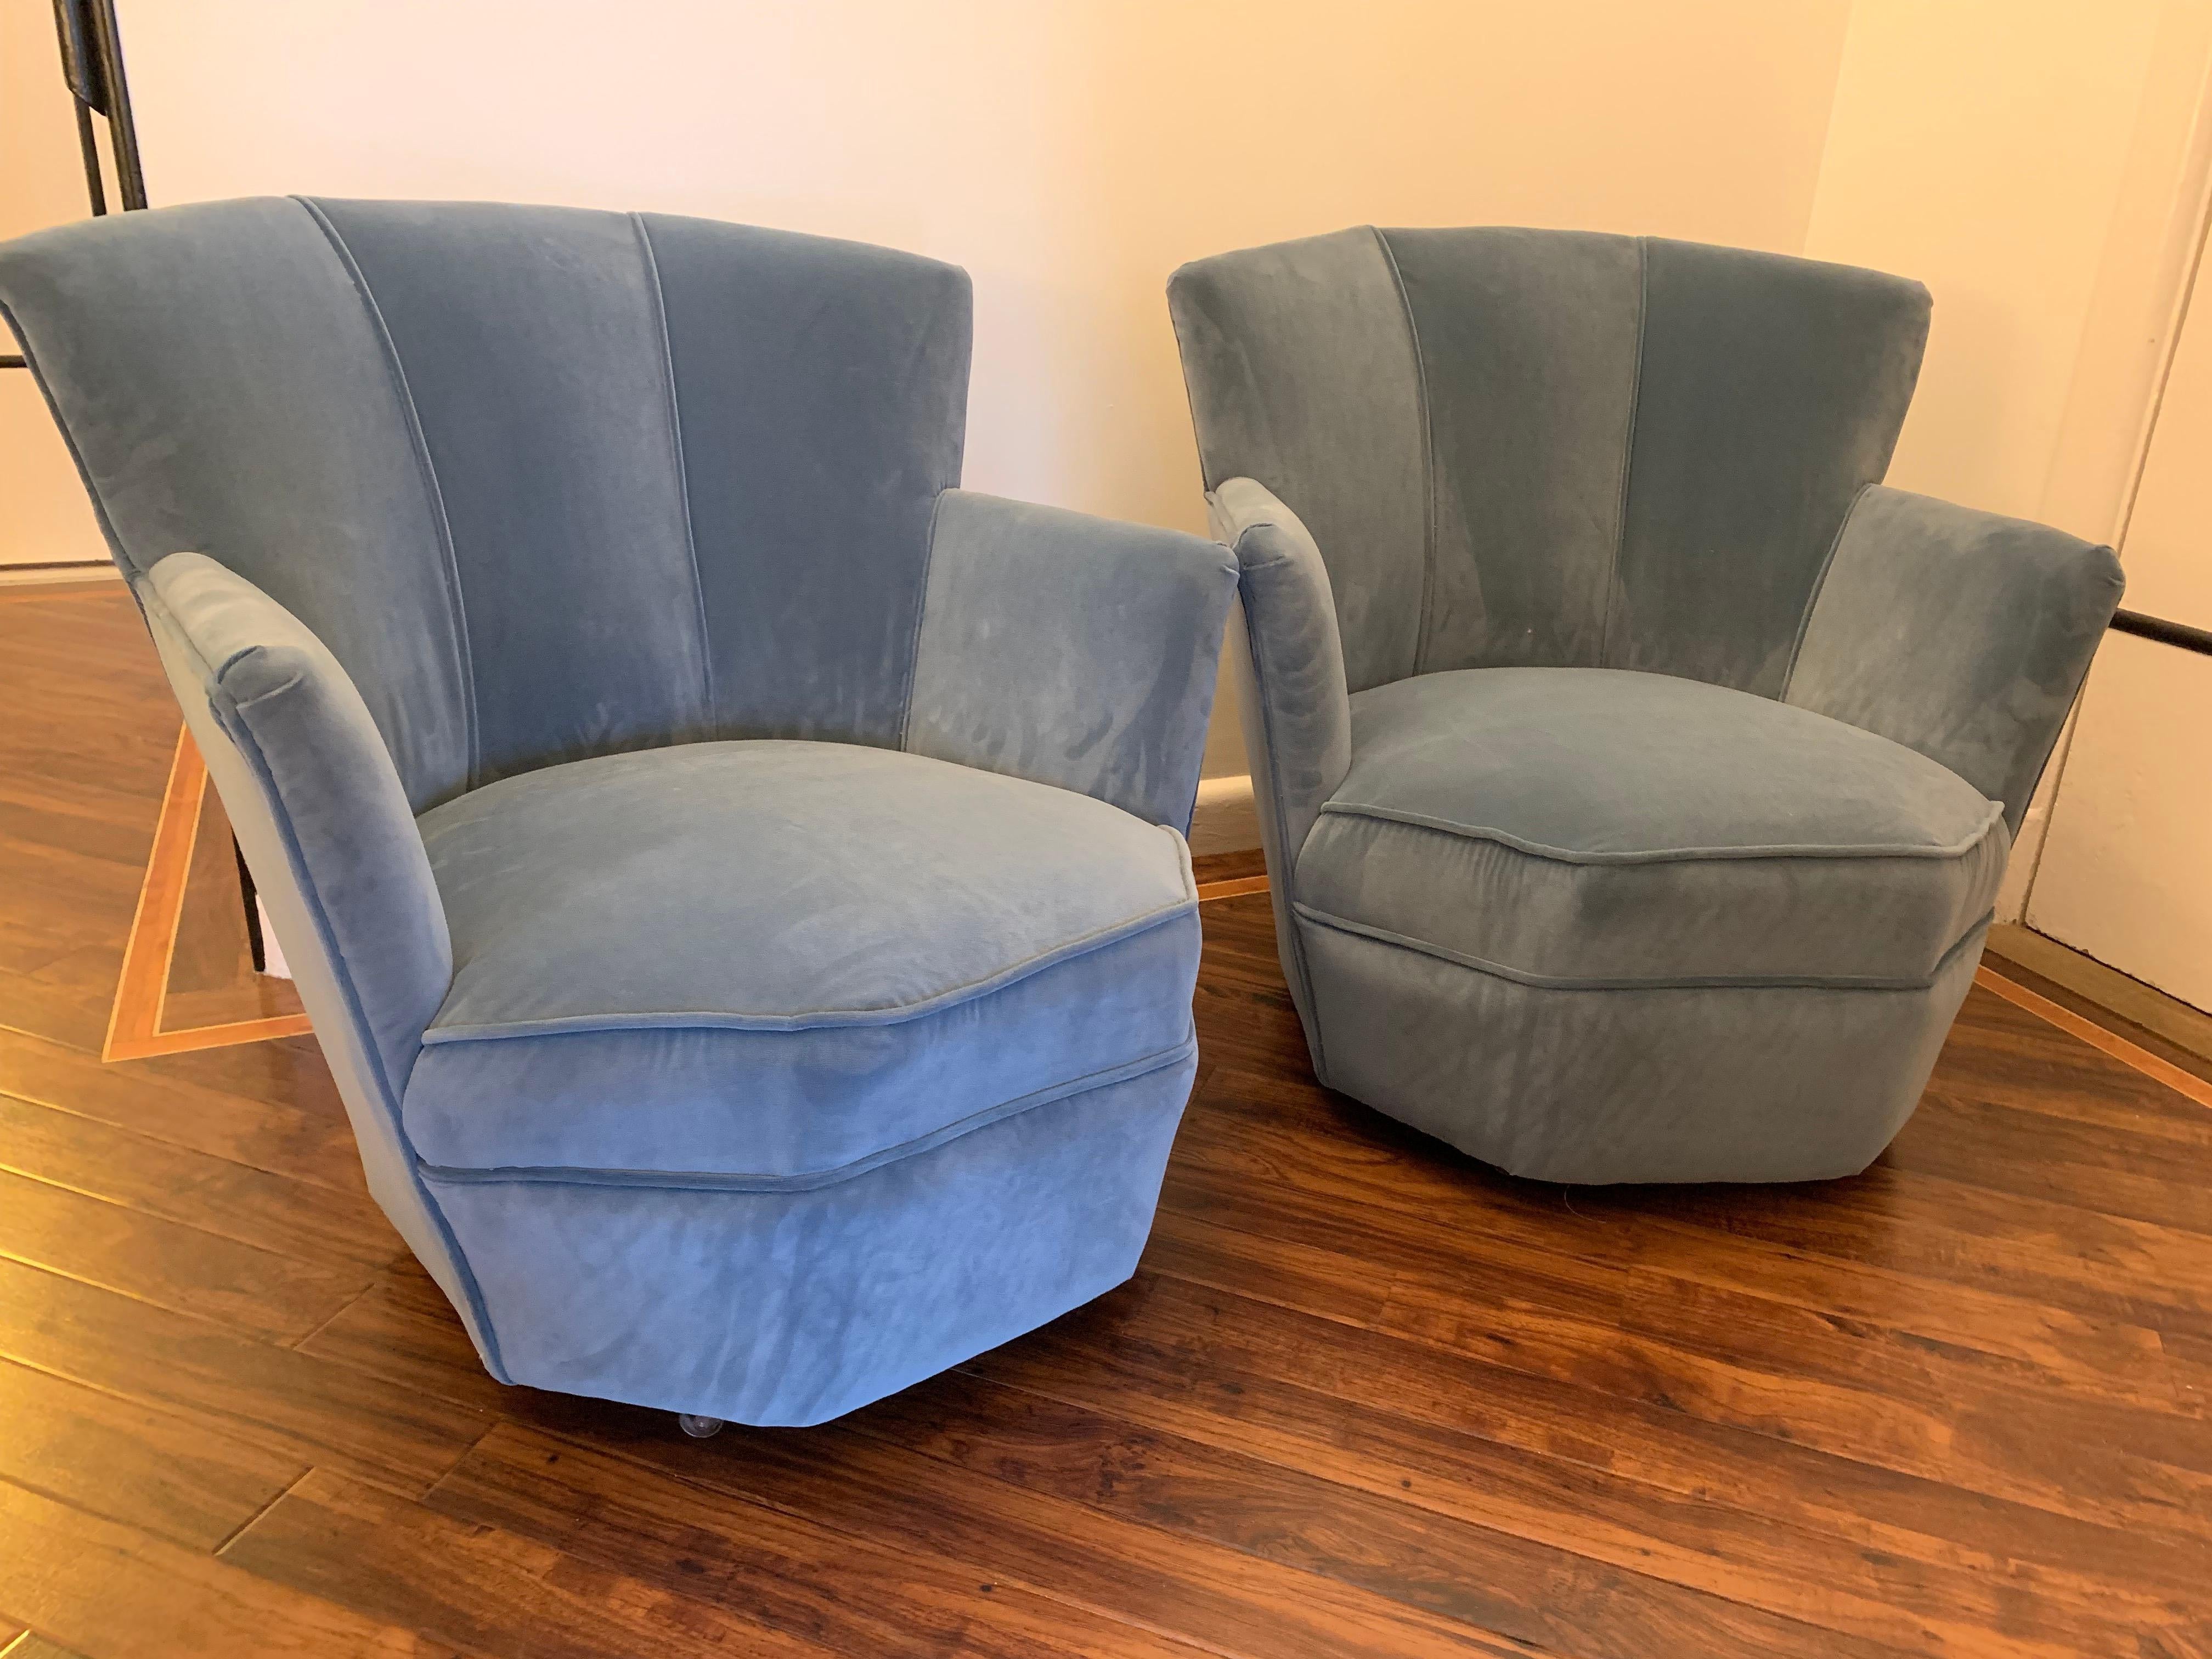 A pair of Art Deco cocktail chairs, with their original sprung seats have just been reupholstered in a soft powder blue velvet, so in excellent condition.

Each chair has its original castors.

Height of seat 33 cm

Dimensions:
Height 70 cm